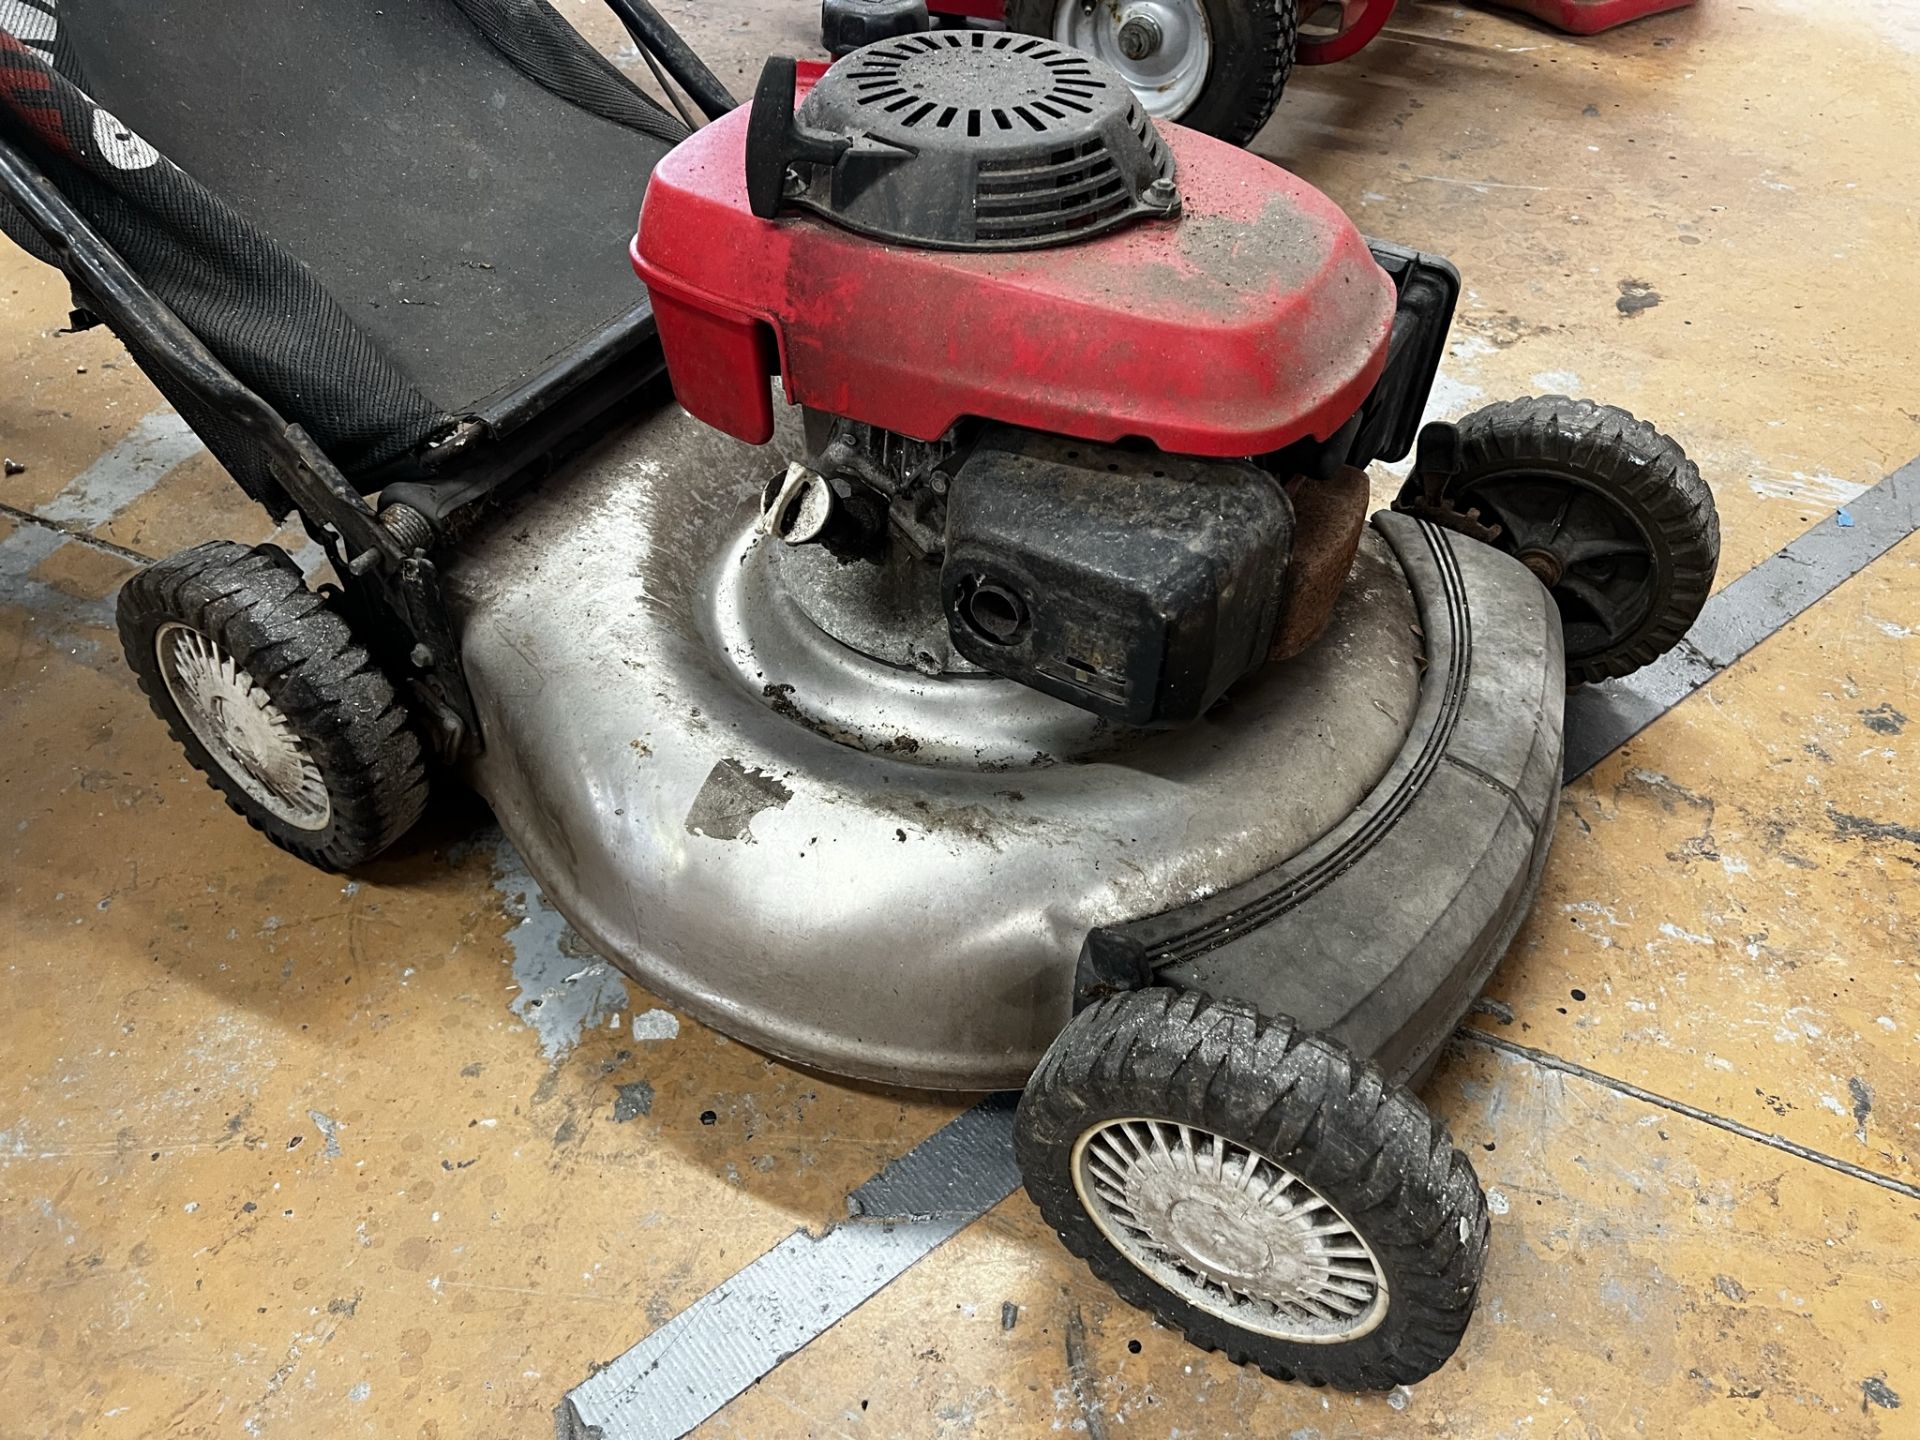 GAS POWERED LAWN MOWER WITH BAG (LOCATED IN WEST PALM BEACH, FL) - Image 2 of 3